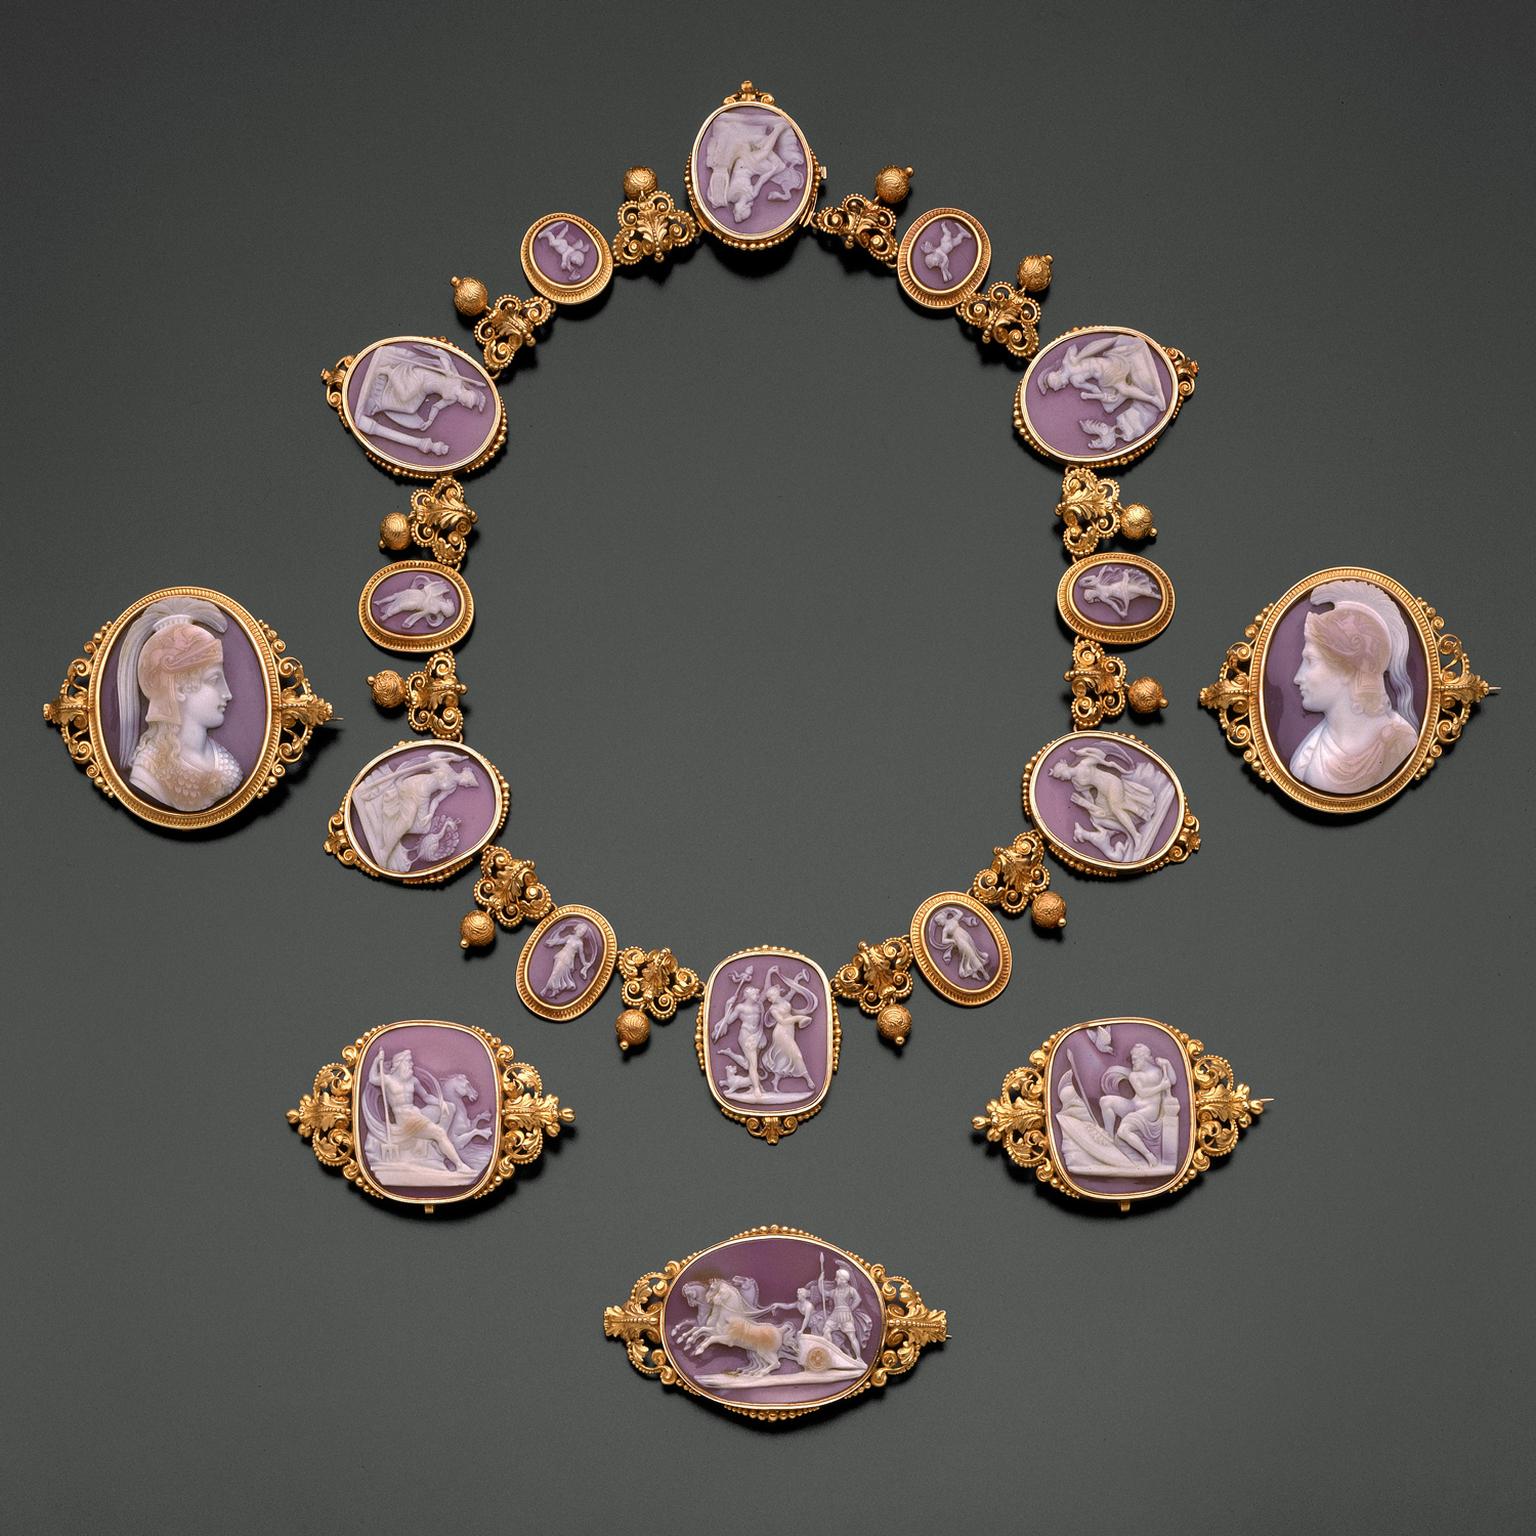 Revival necklaces and brooches, circa 1840